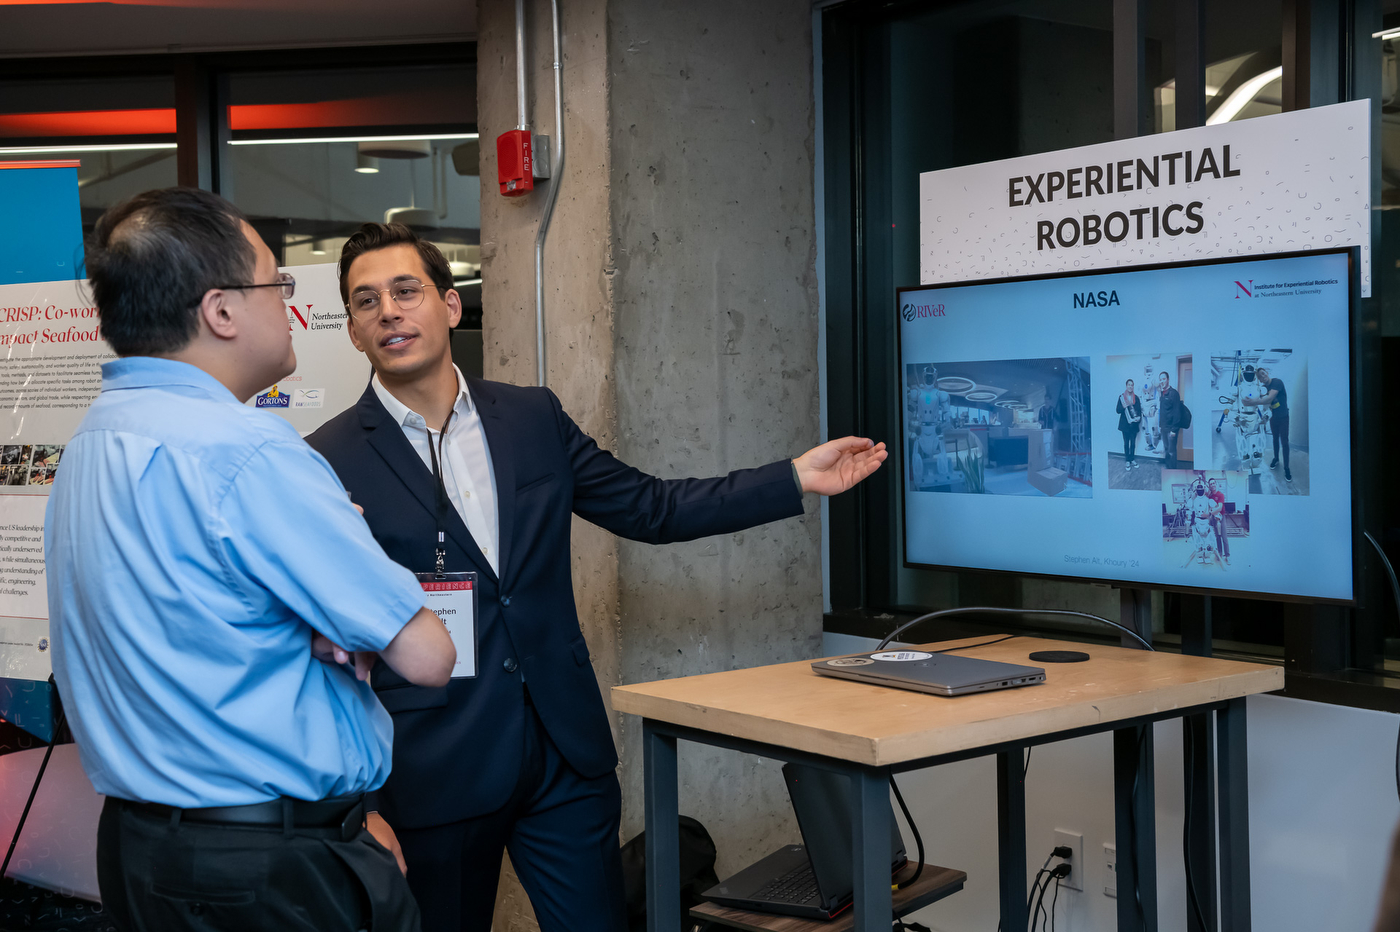 Speaker gesturing to a TV screen displaying a slide about Experiential Robotics at the Experience Powered by Northeastern campaign stop in Arlington.